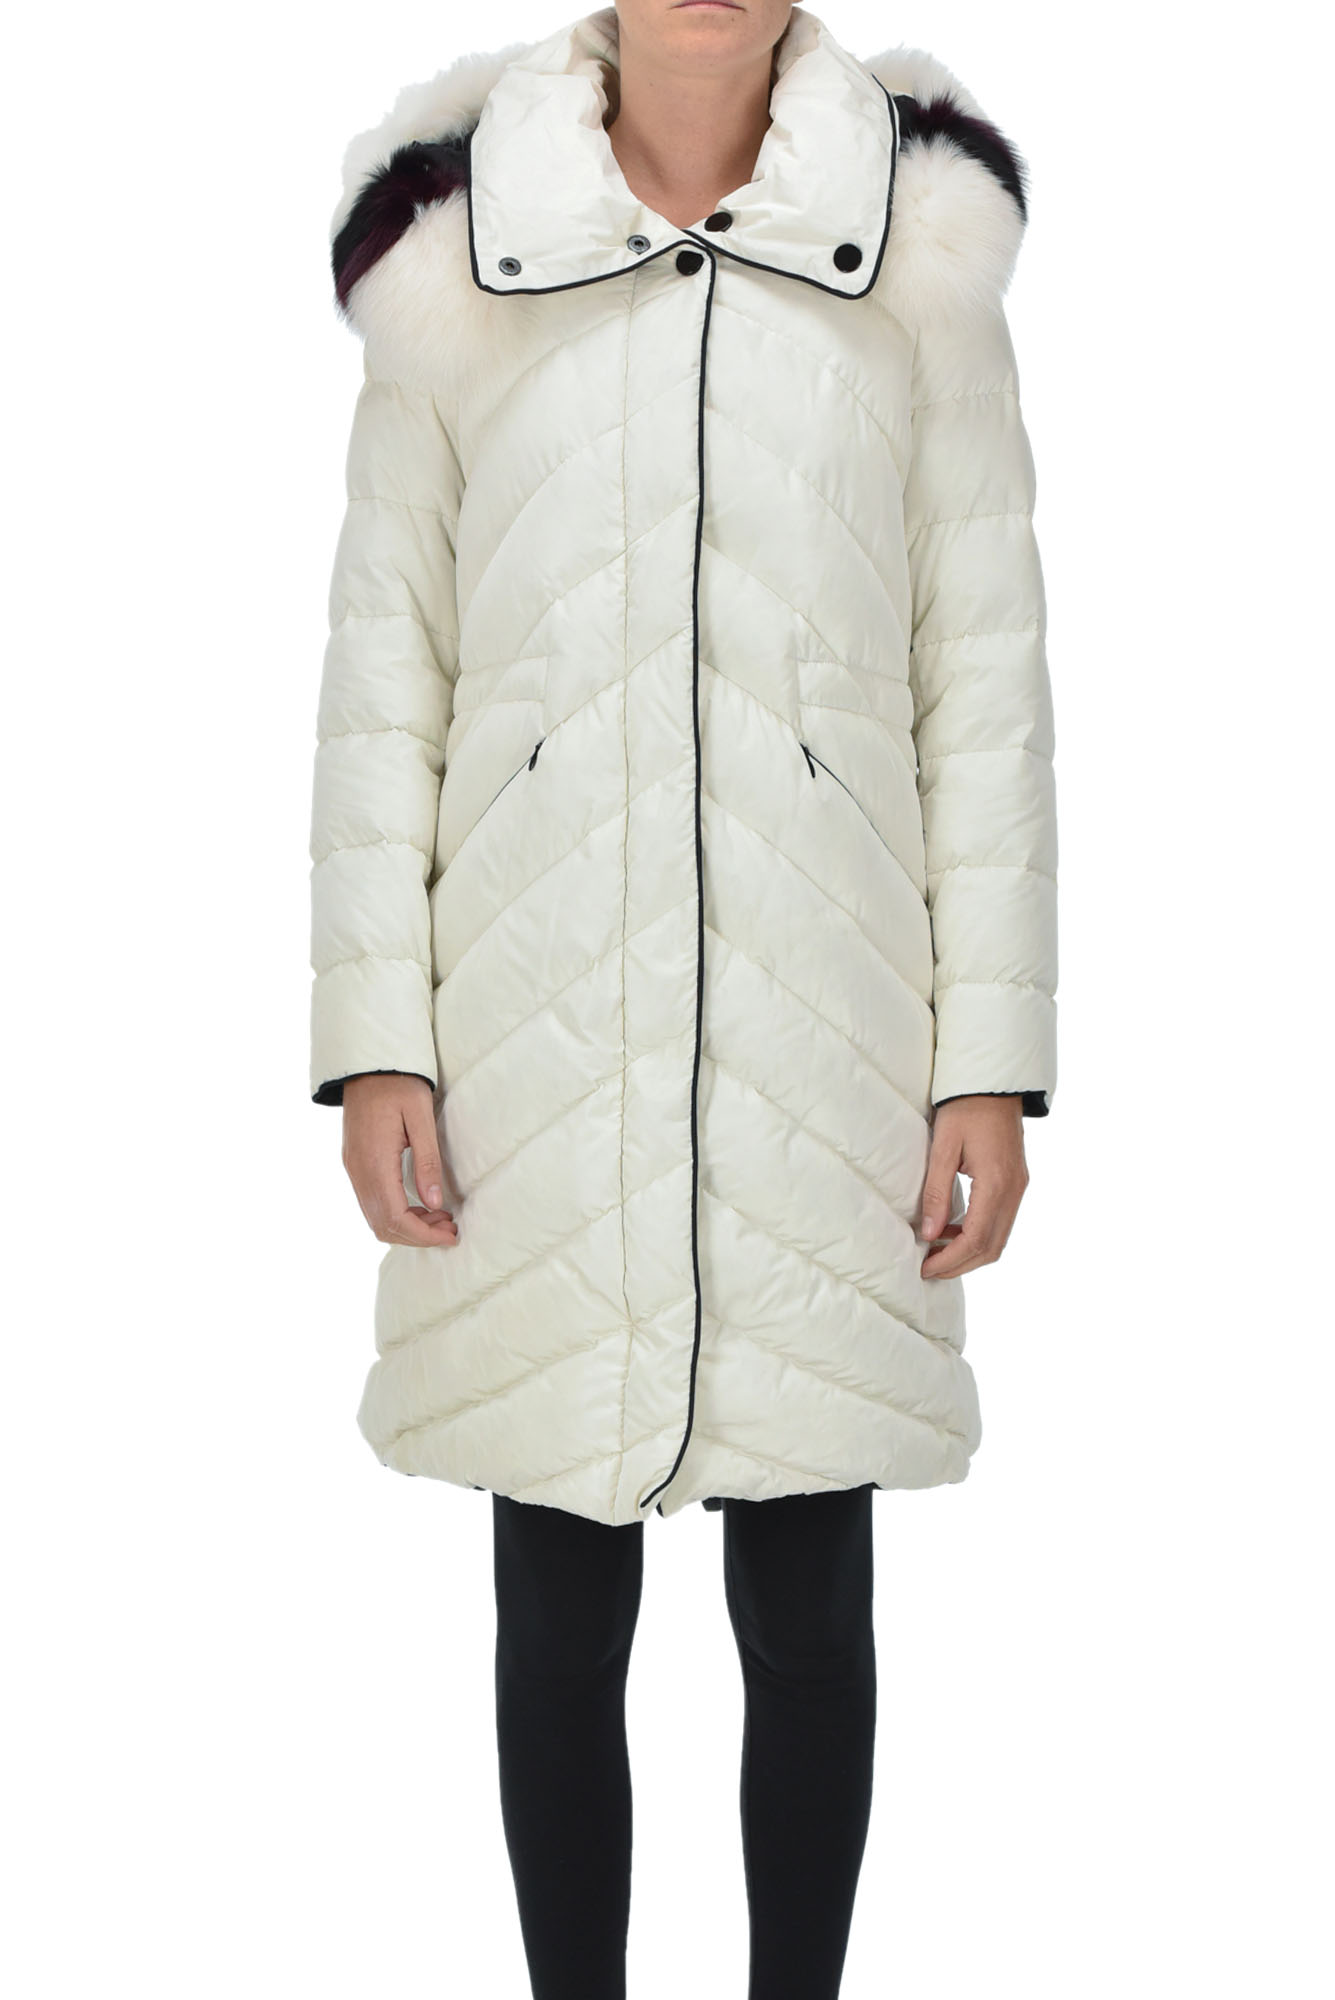 Landi Quilted down jacket - Buy online on Glamest Fashion Outlet ...